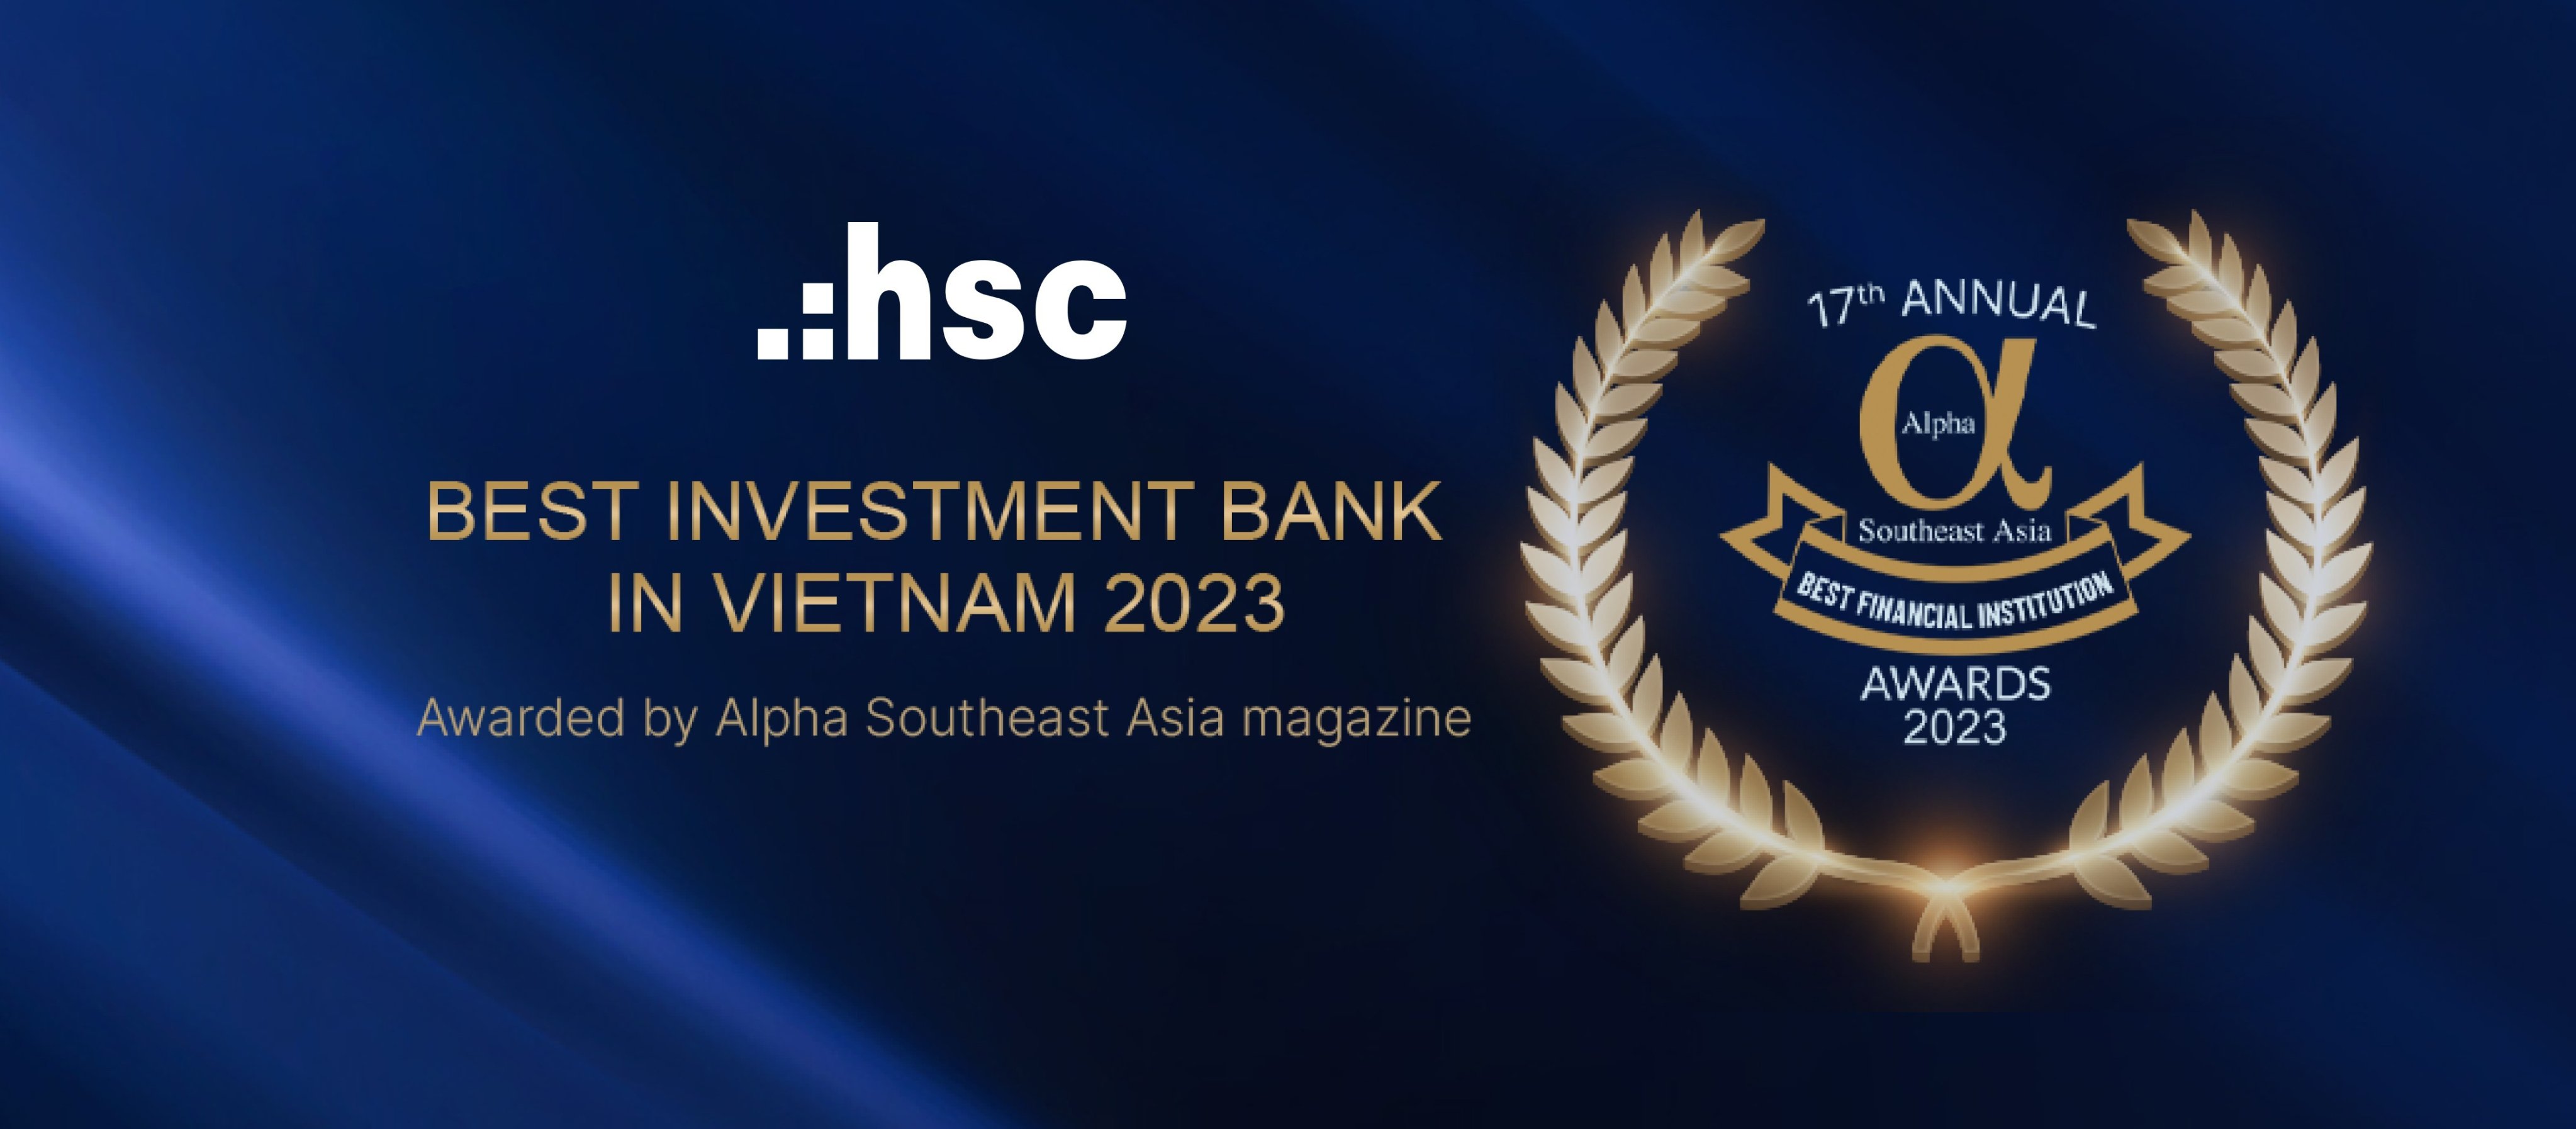 HSC - “Best Investment Bank in Vietnam 2023” – Honored by Alpha Southeast Asia